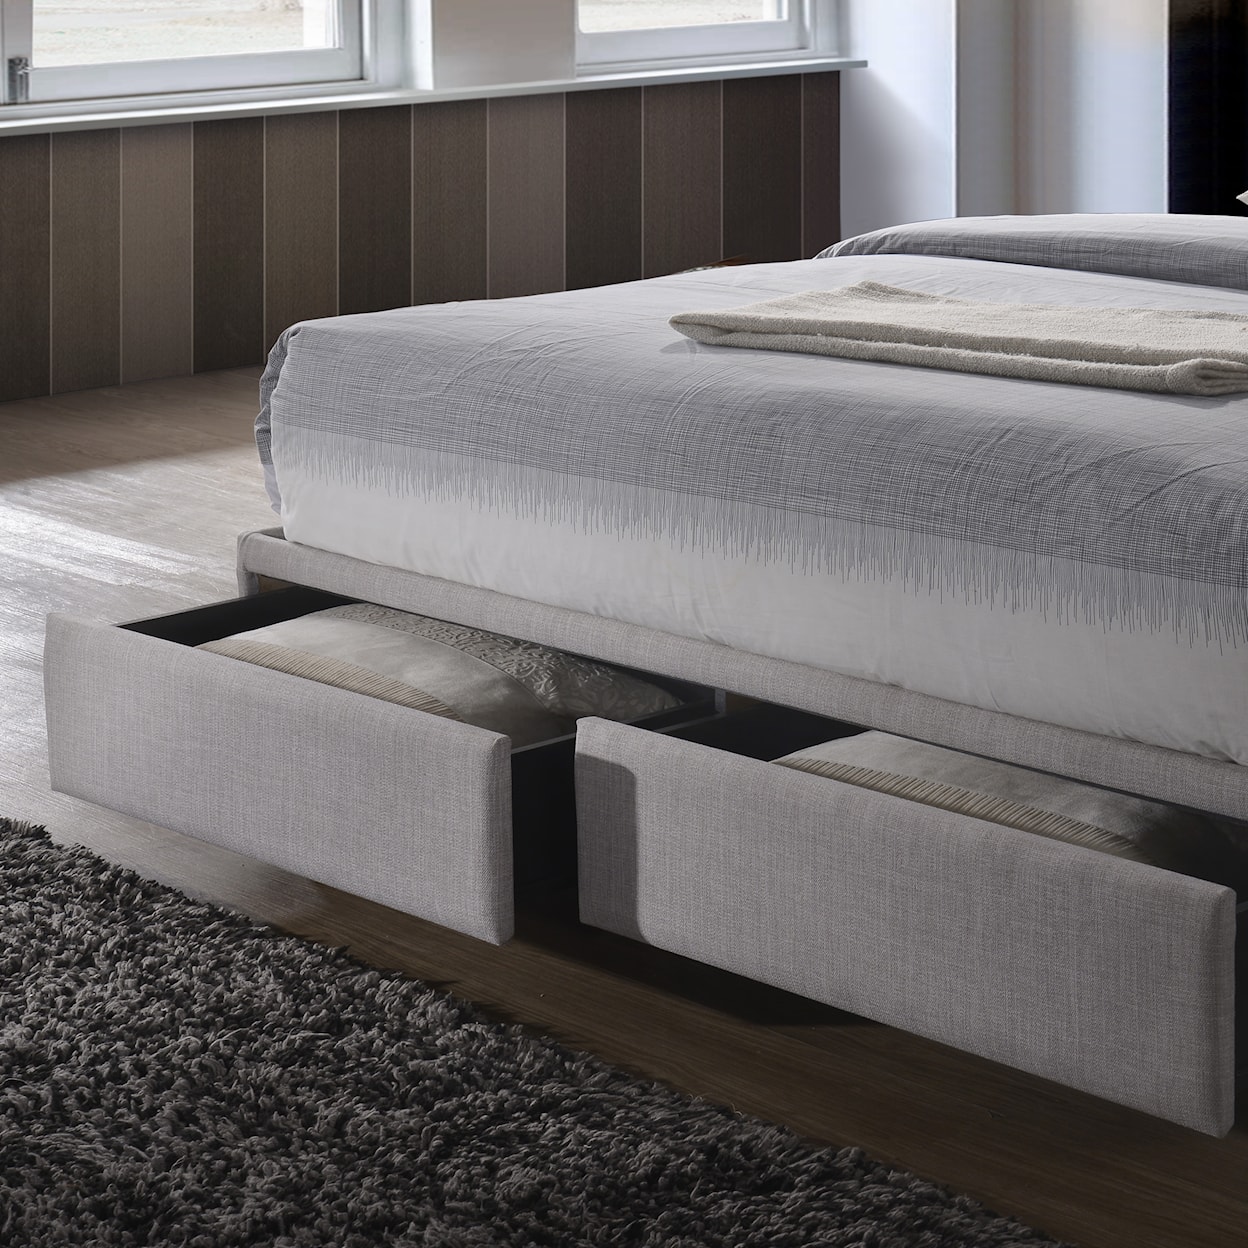 Accentrics Home Fashion Beds Queen Upholstered Bed